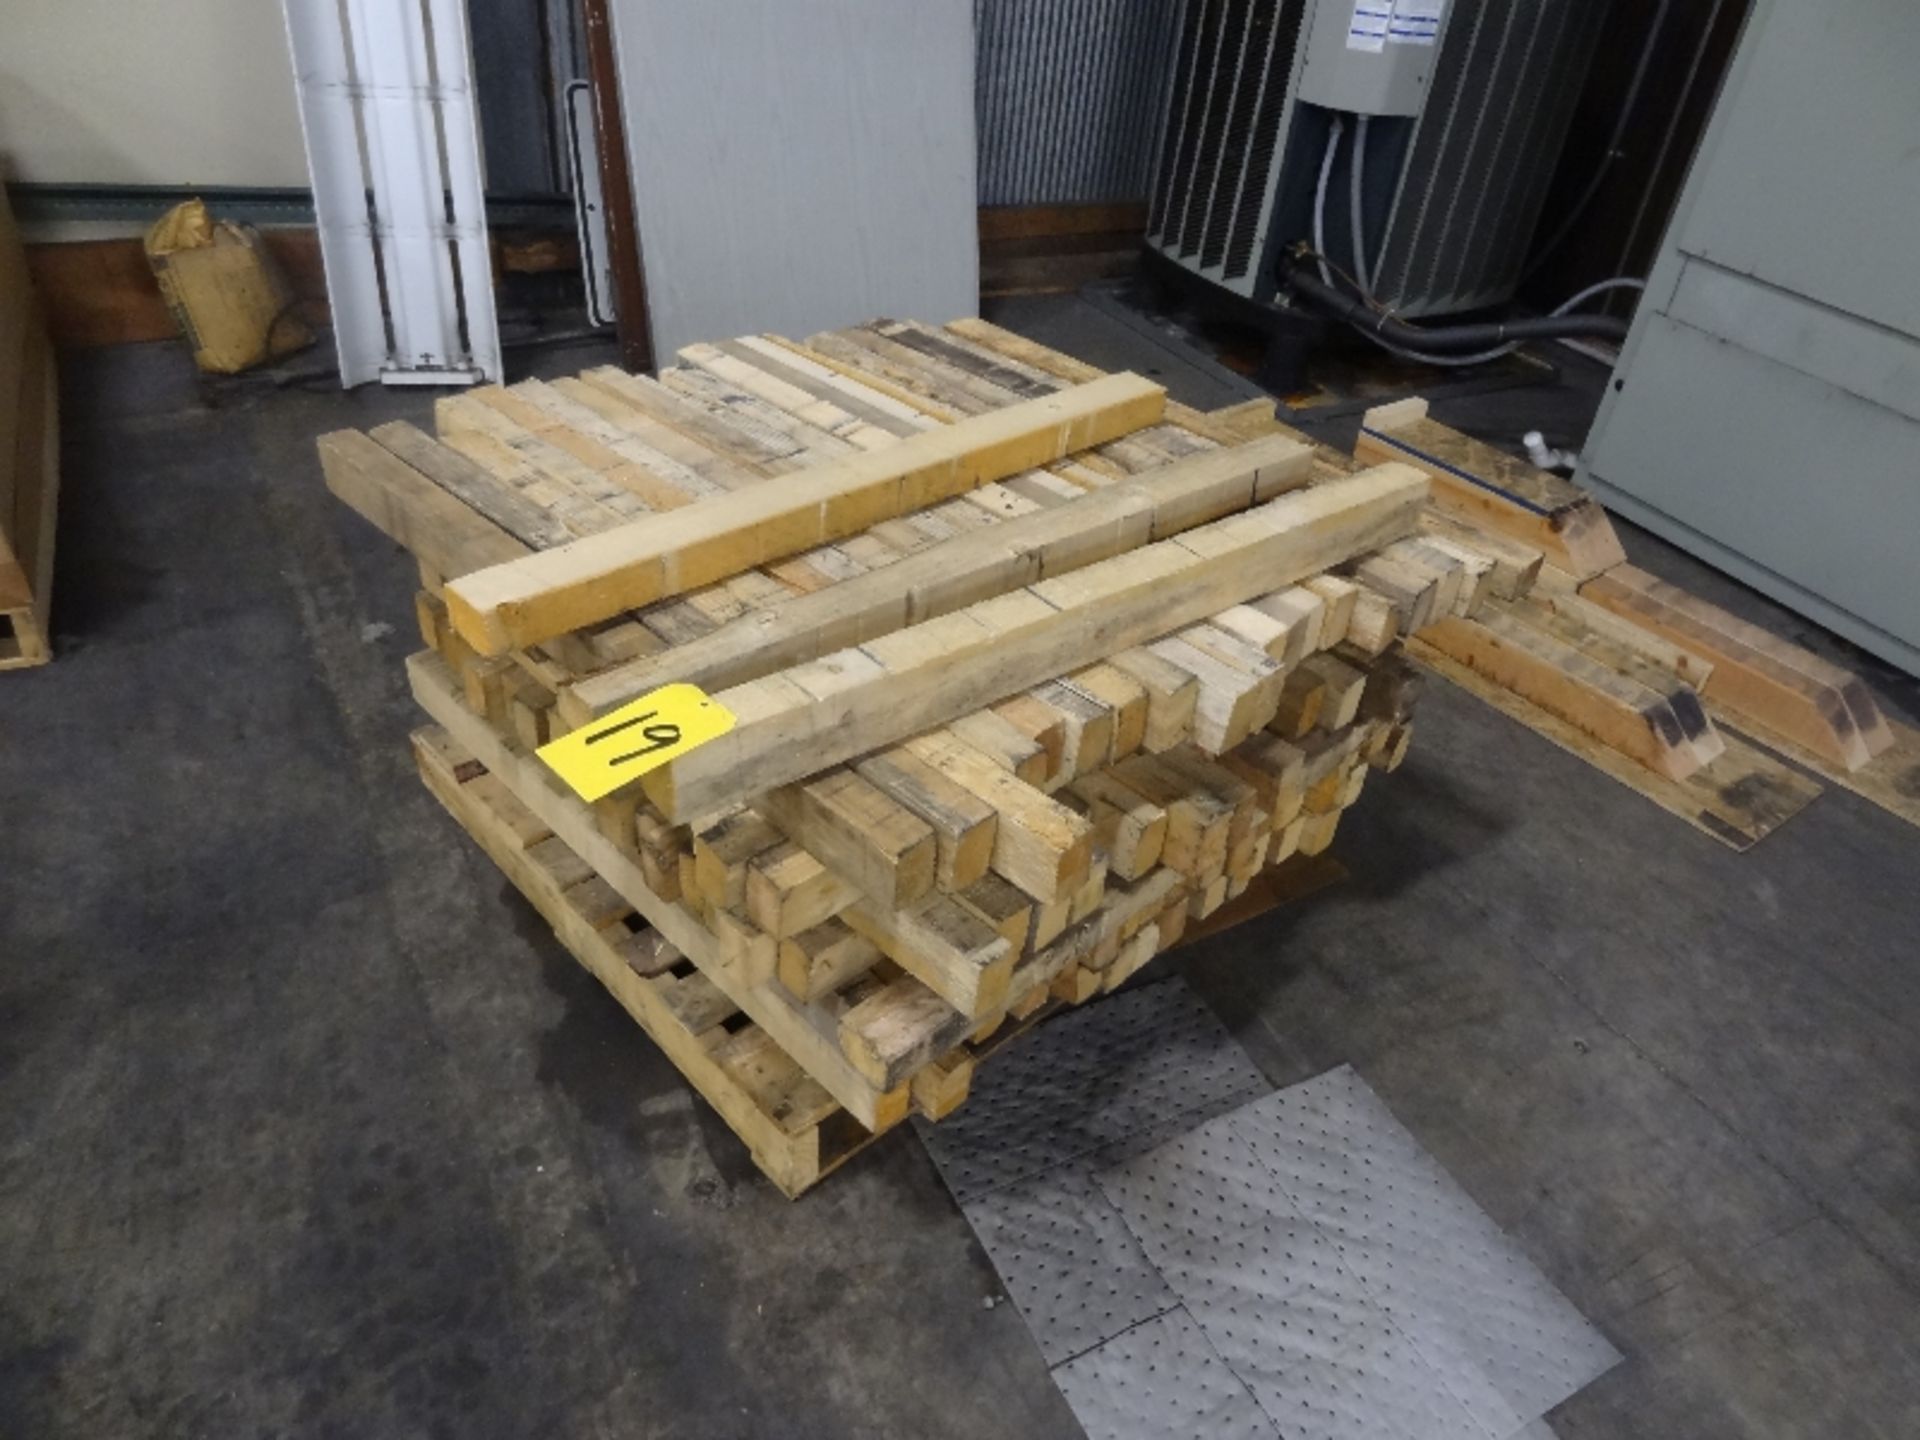 (1) Pallet of 4' pieces of wood